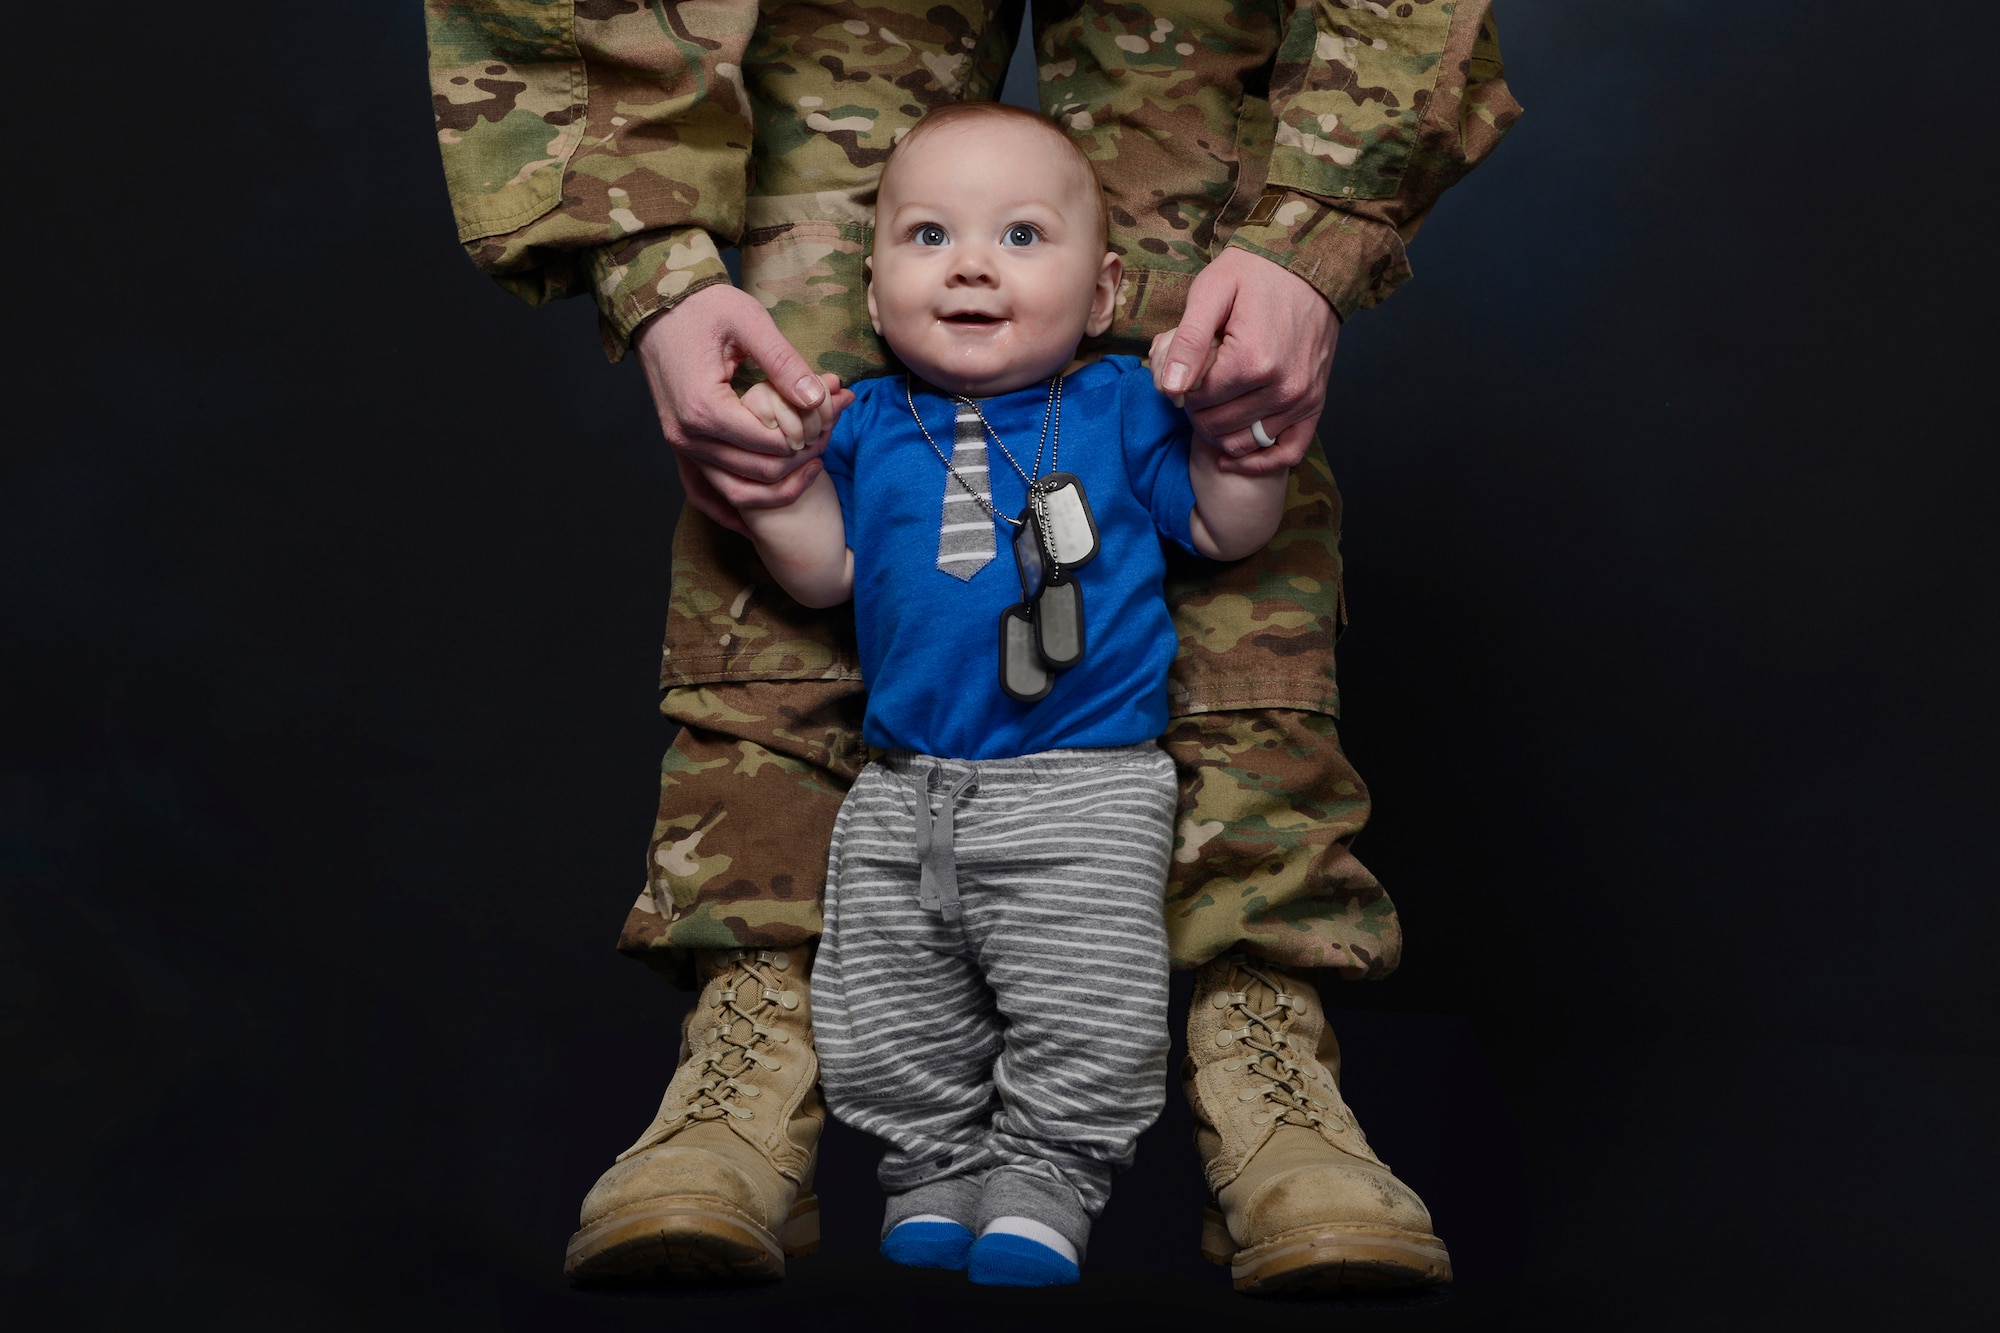 Staff Sgt. Lauren Cerda, 341st Security Forces Support Squadron training instructor, poses with son Preston. In recognition of the well documented, evidence-based health advantages of breast-feeding for both infants and mothers, this progressive stance ensures all women have an adequate space to express breast milk and the opportunity to breast-feed. (U.S. Air Force photo/Staff Sgt. Delia Marchick)